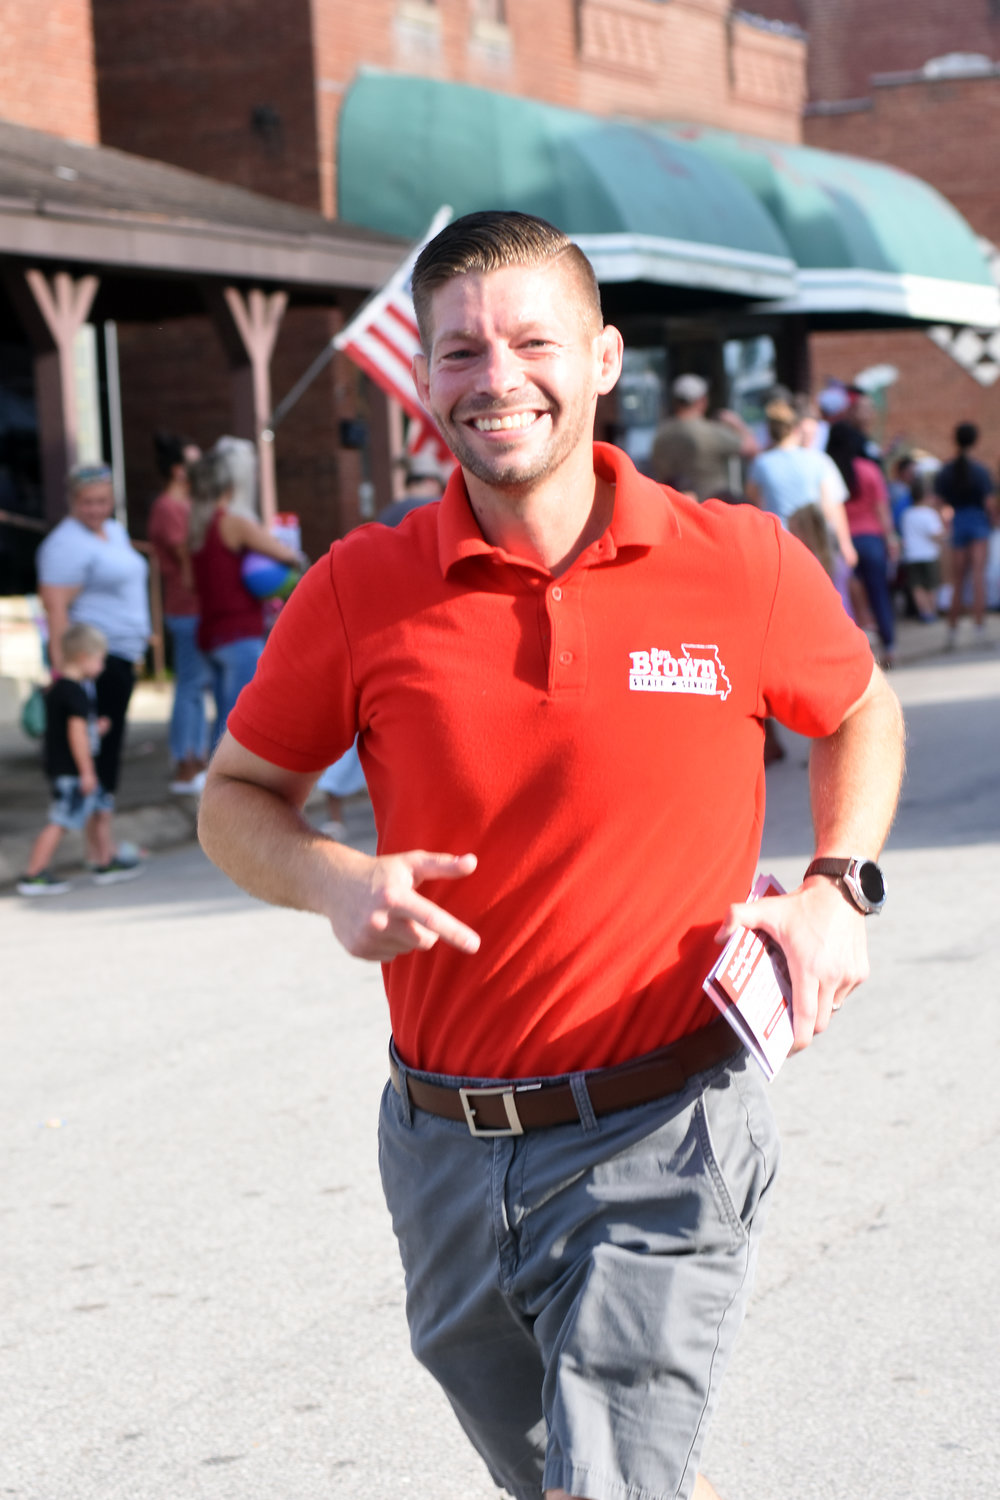 Ben Brown received just over 1,000 votes in Gasconade County to help him win the 26th Senate District primary over four Republican challengers. He jogs to keep up with his parade walkers after stopping to greet people along First Street. He will face Democrat John Kiehne on Nov. 8.